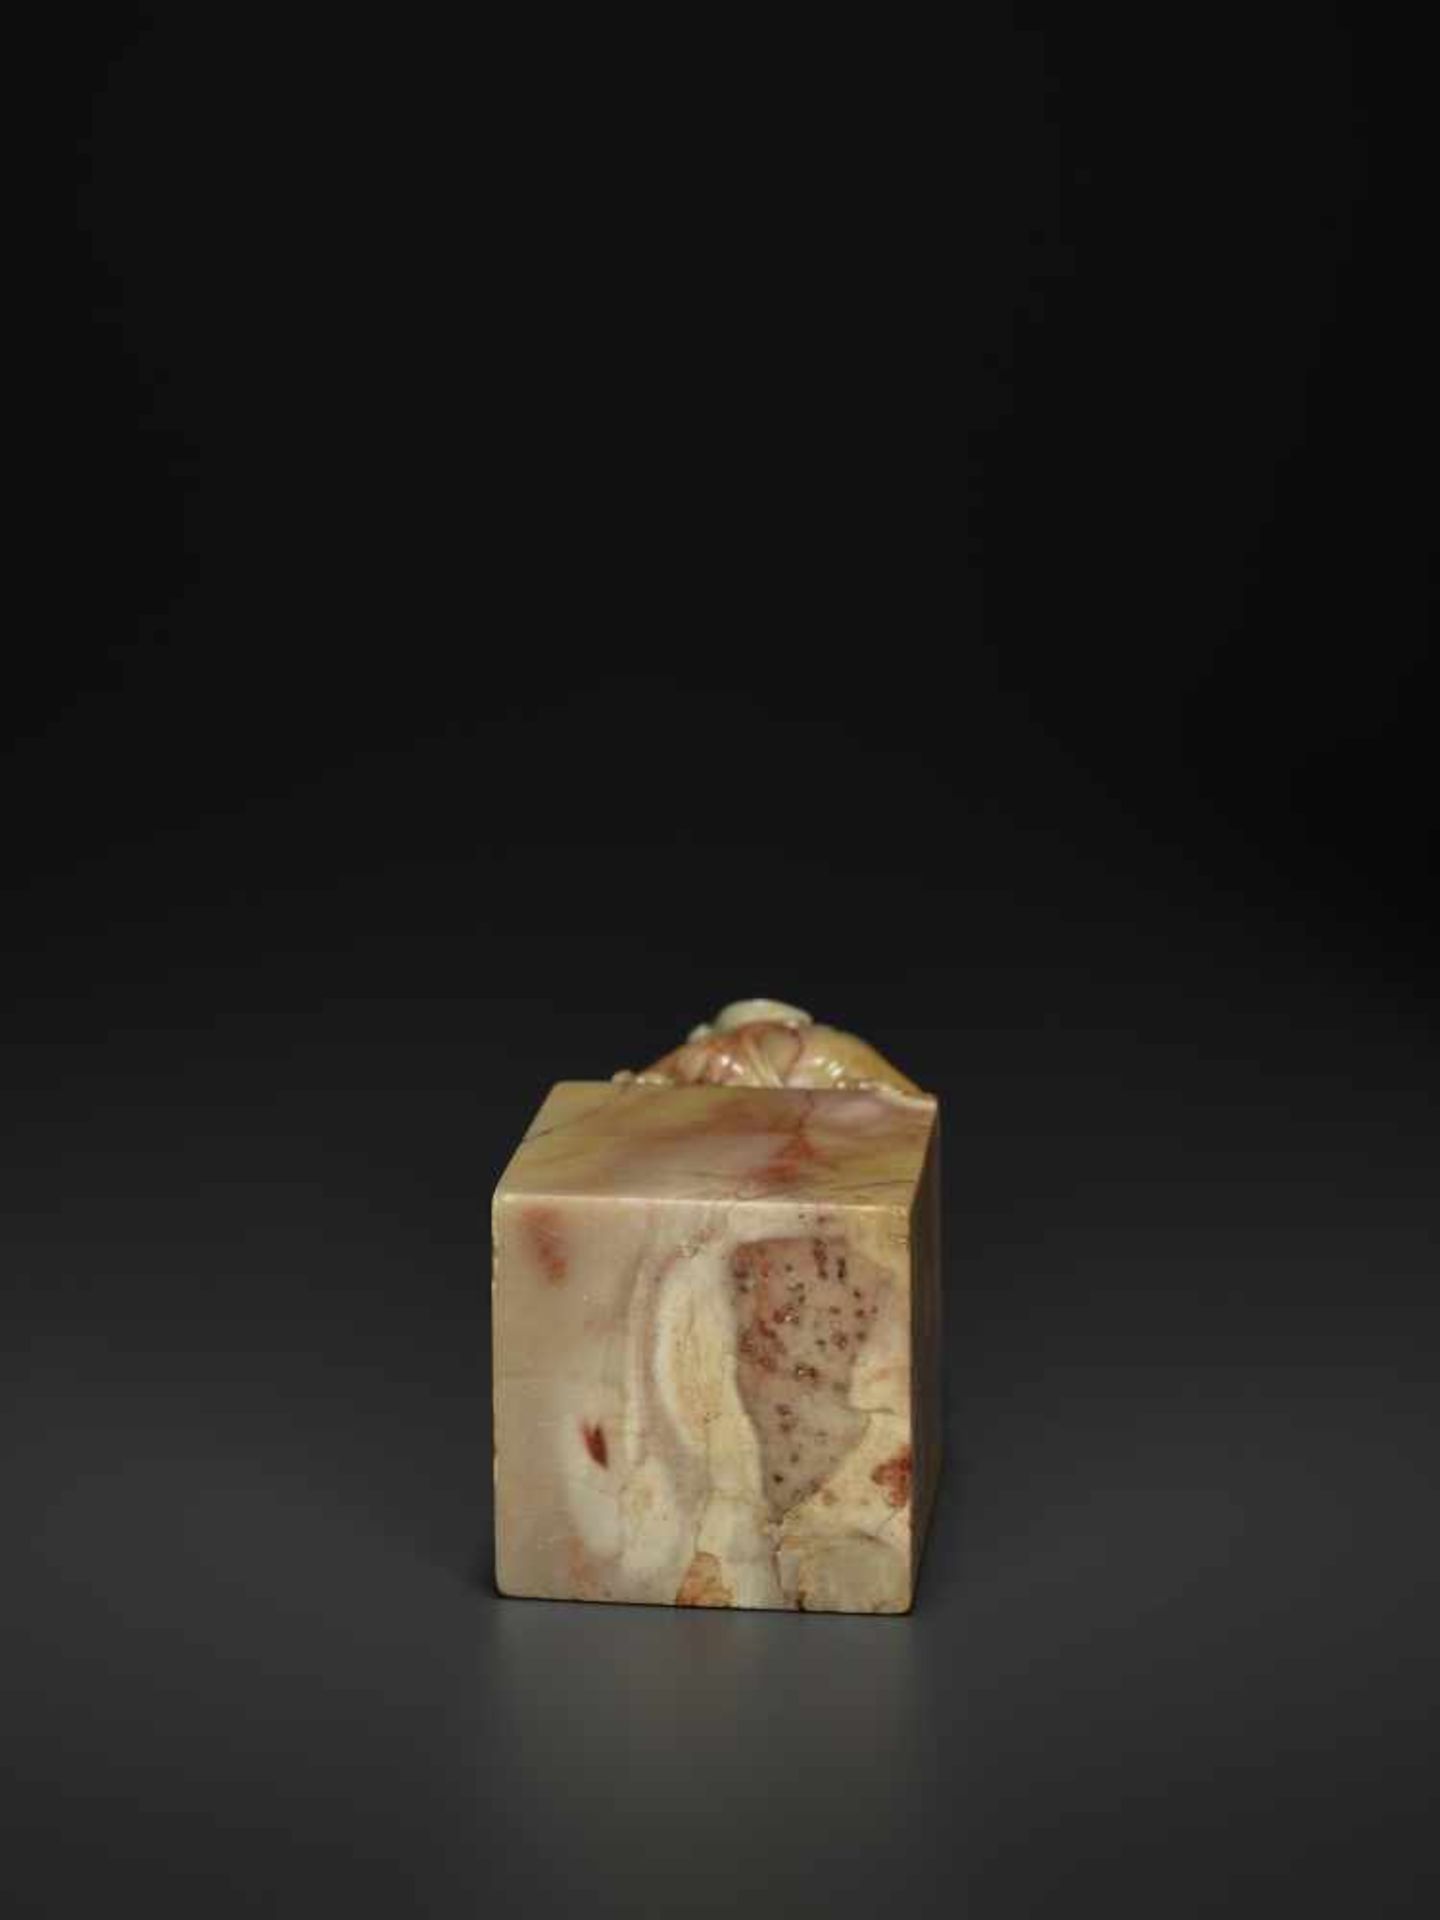 A LARGE SOAPSTONE SEAL, QINGChina, 1780-1860. Openwork carving with a Buddhist lion sitting on a - Image 8 of 8